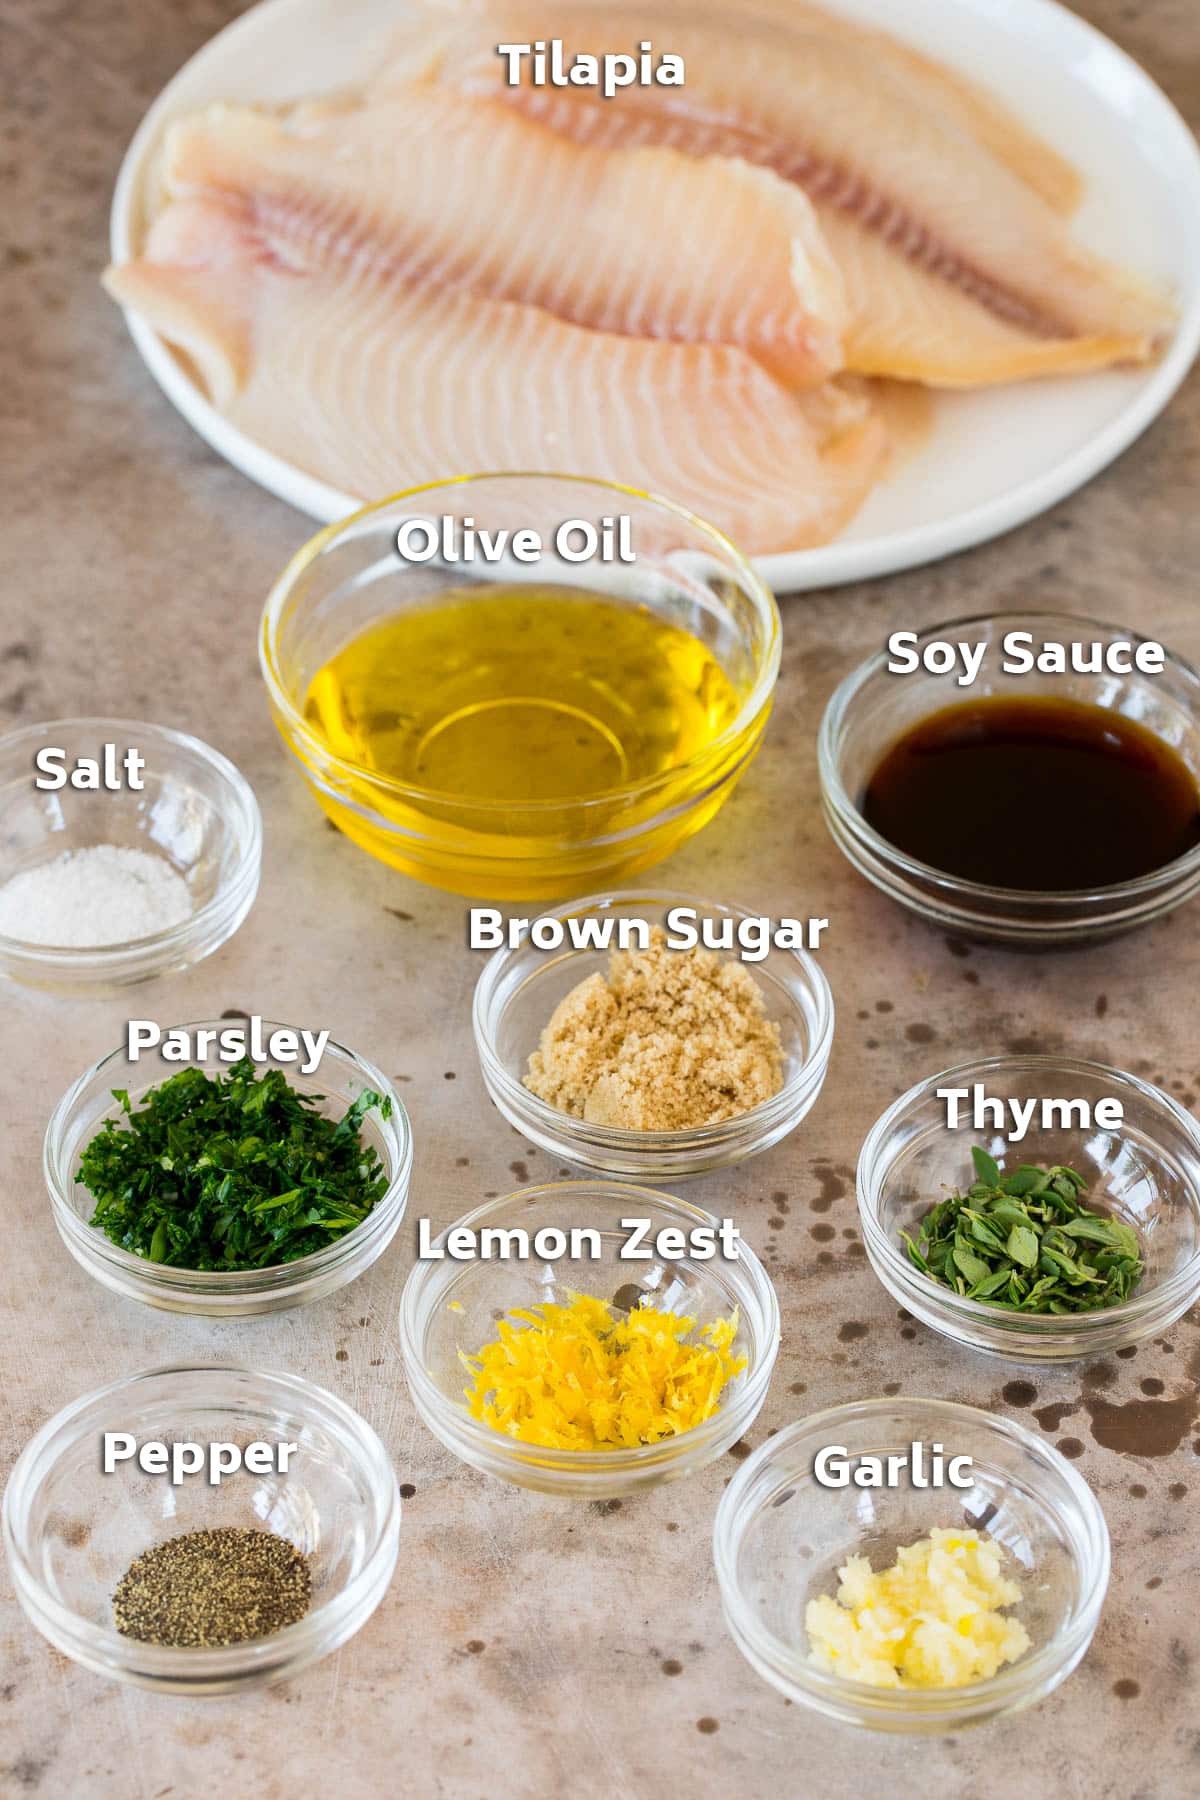 Ingredients including fresh fish, olive oil, soy sauce, herbs and seasonings.